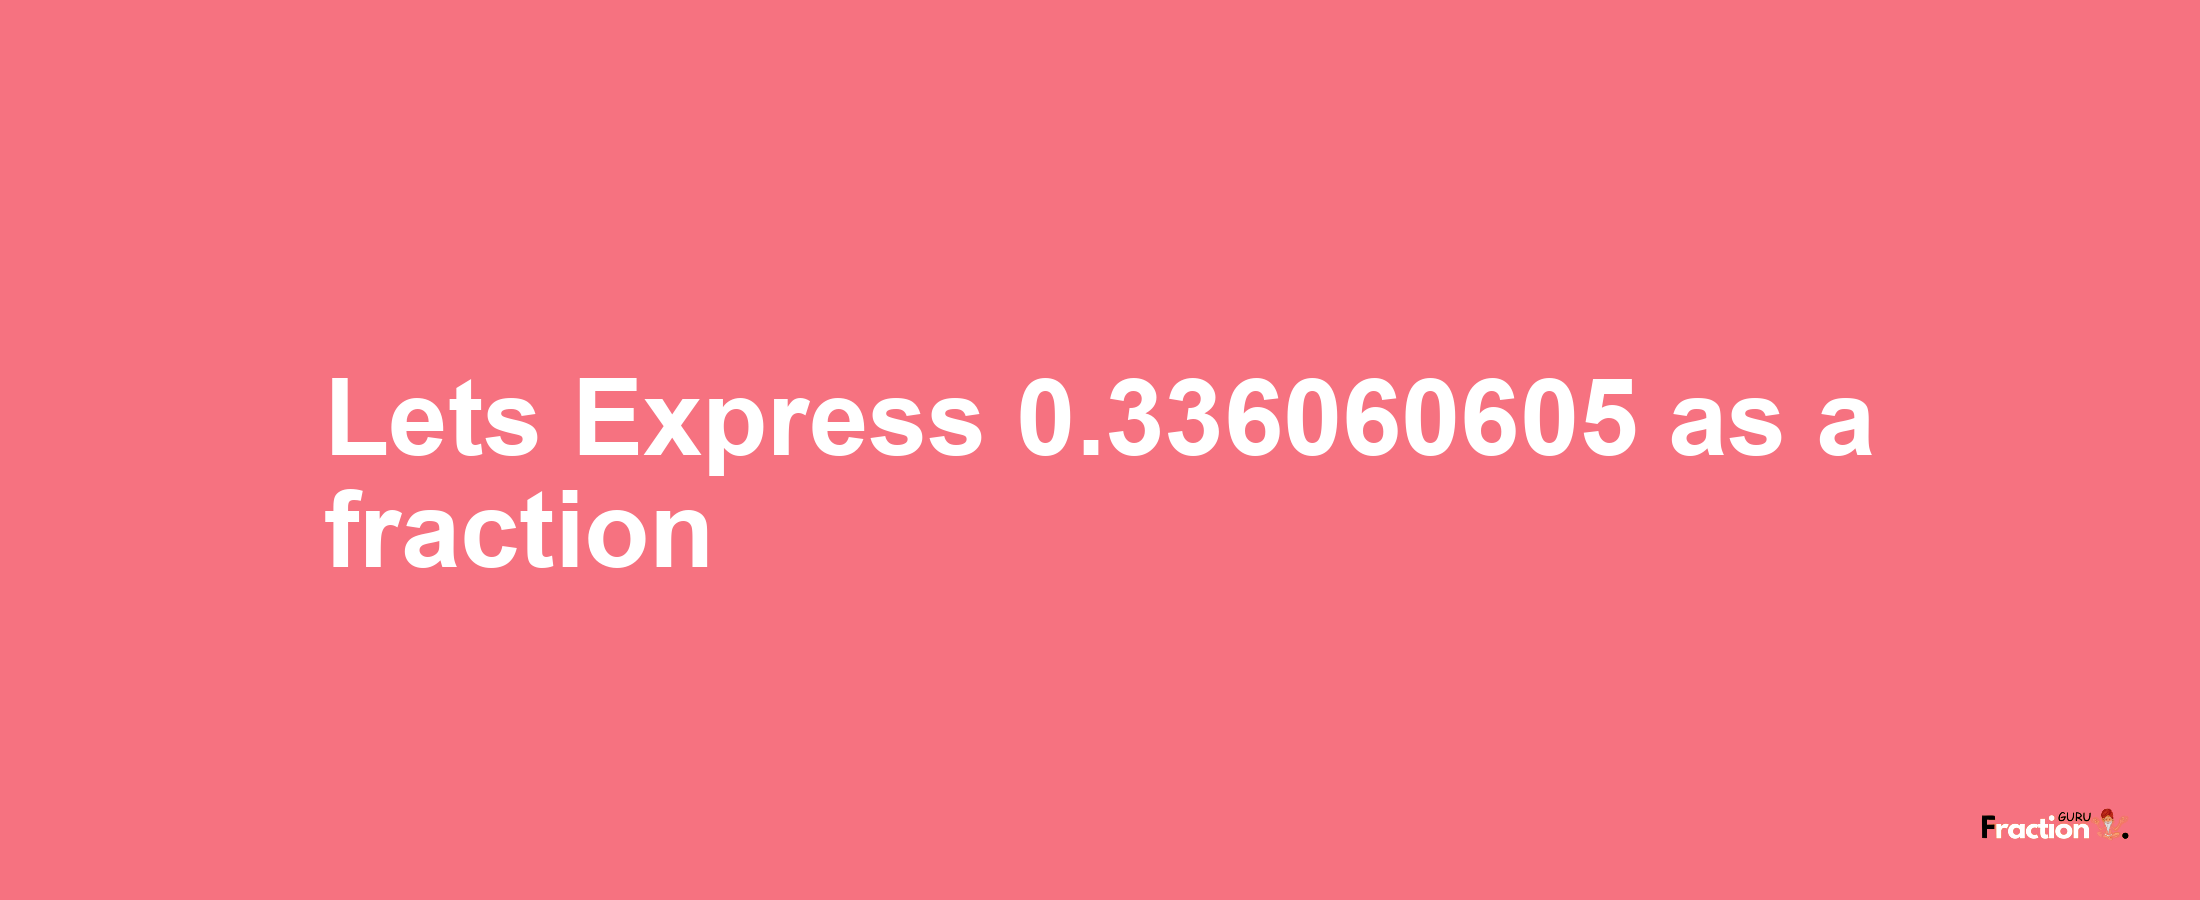 Lets Express 0.336060605 as afraction